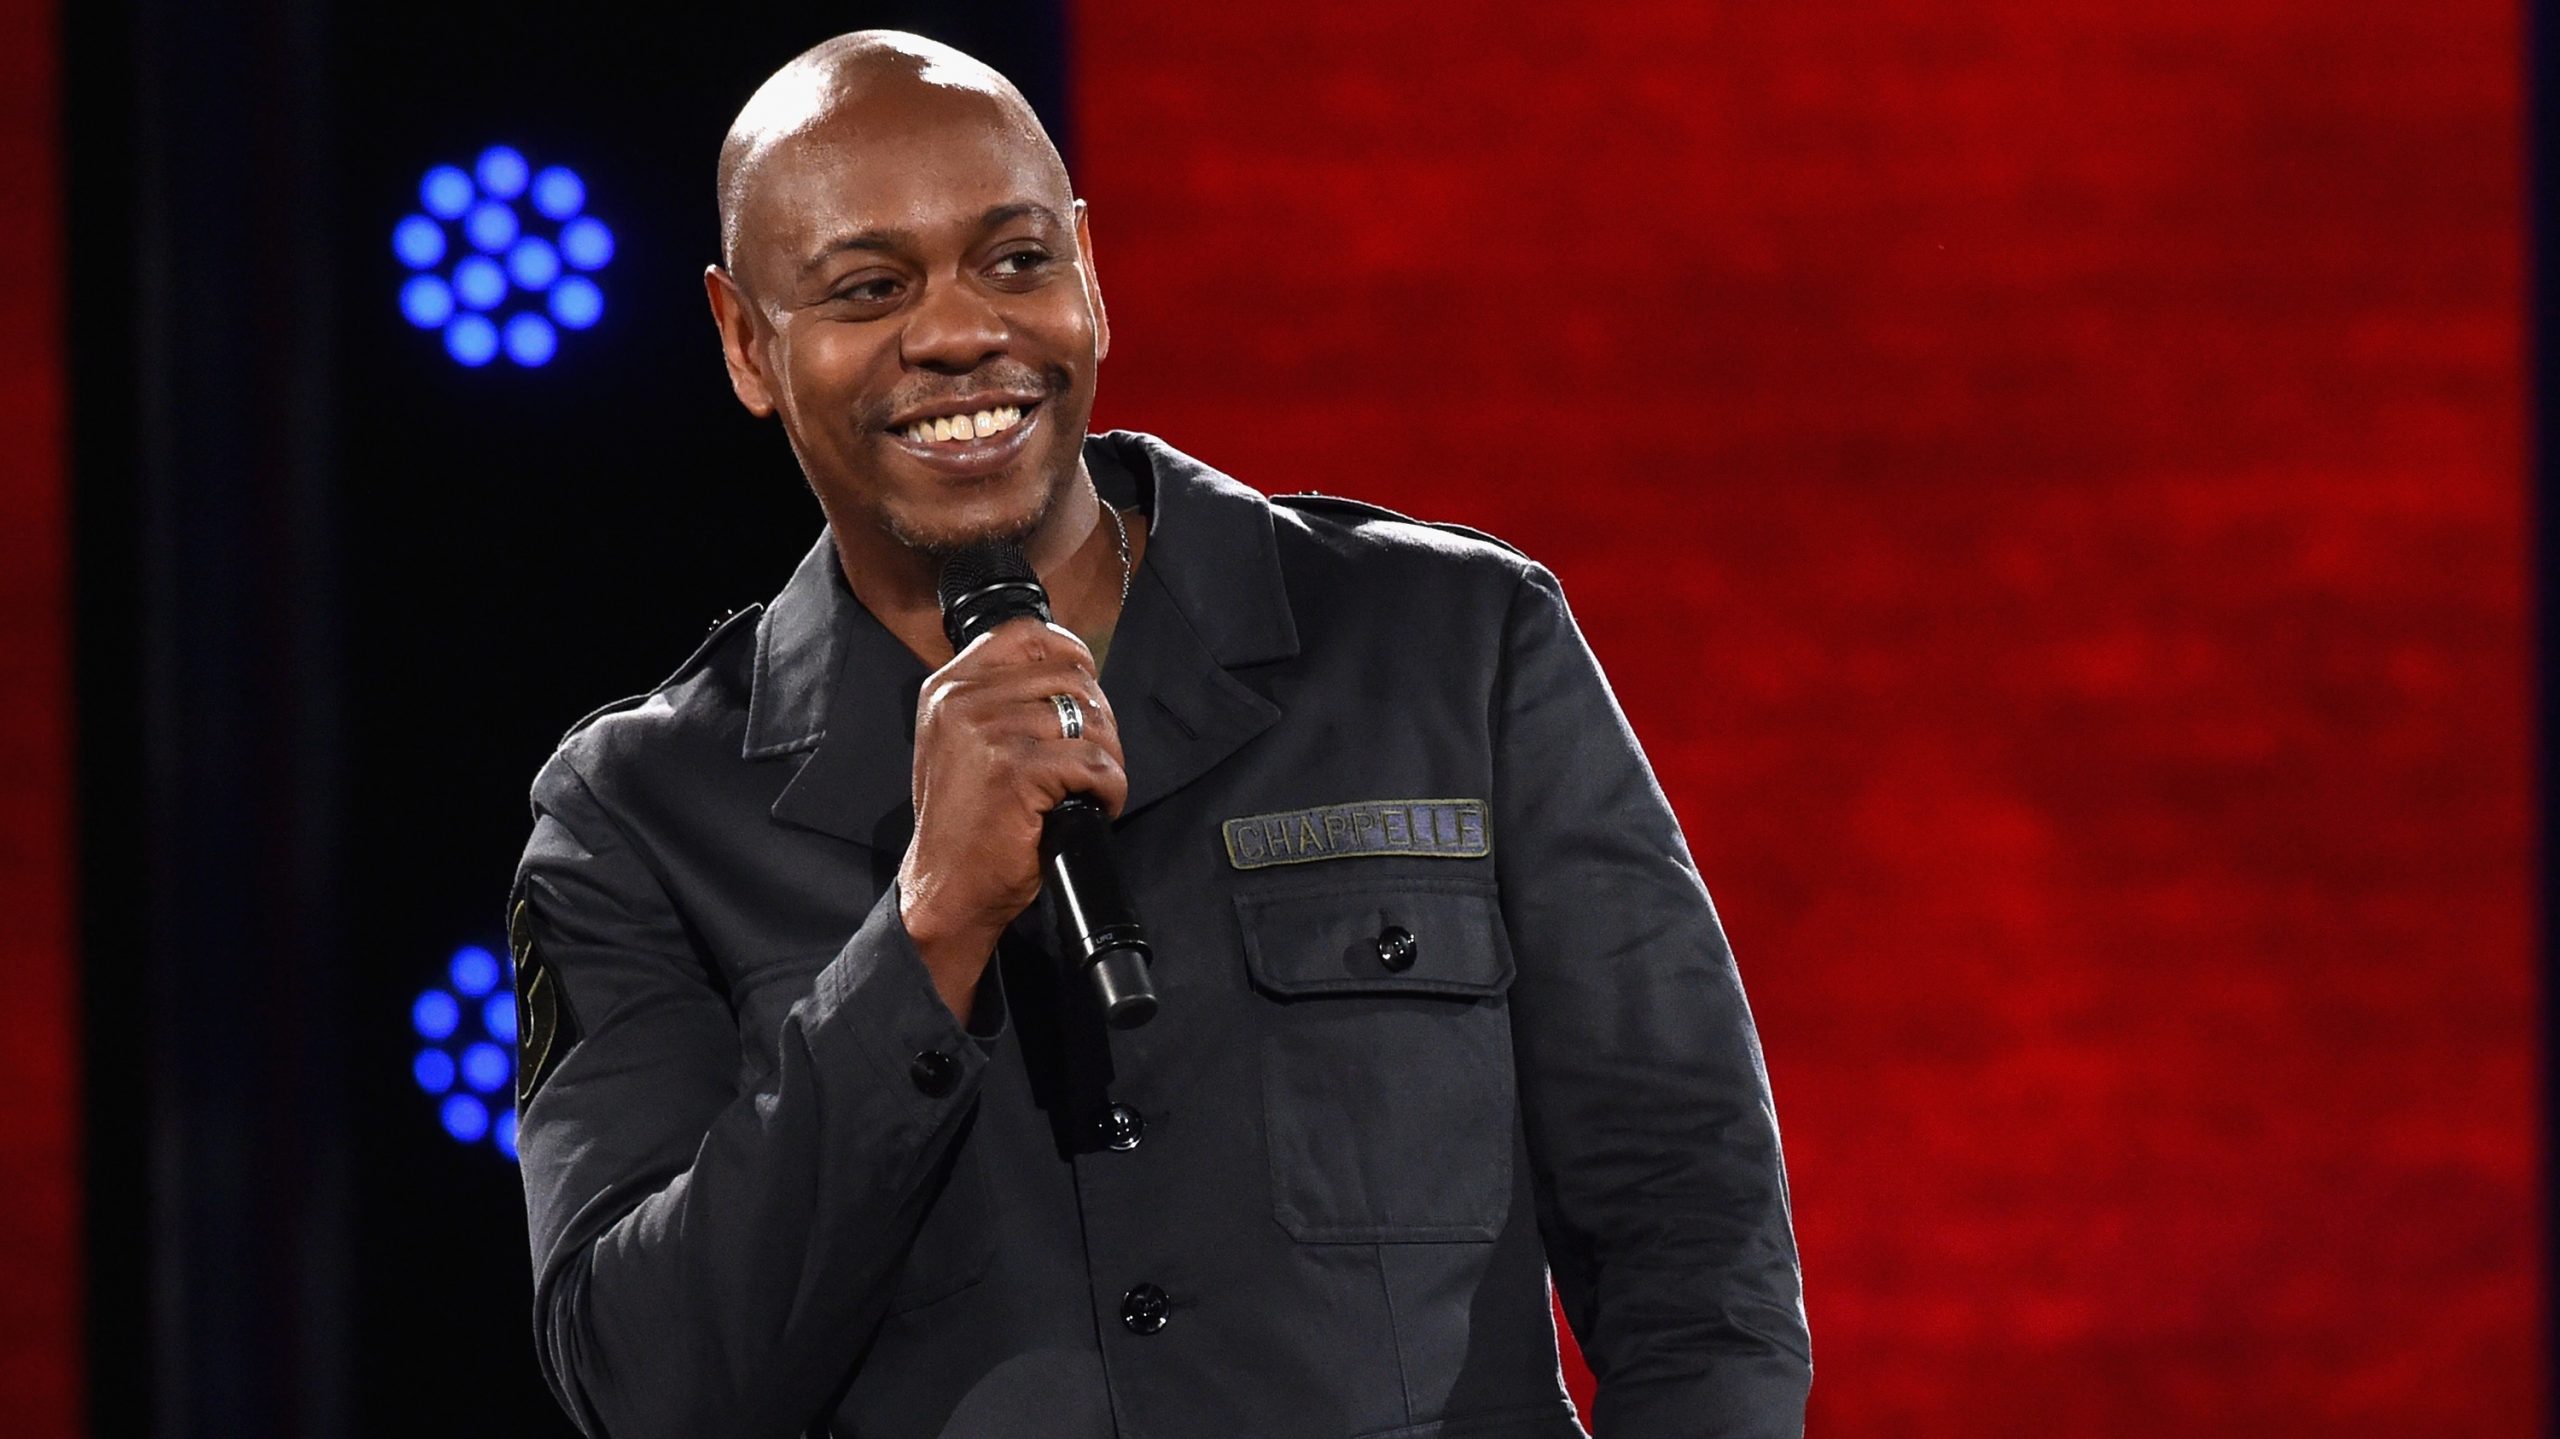 Dave Chappelle gets nominated for Emmy's 2022